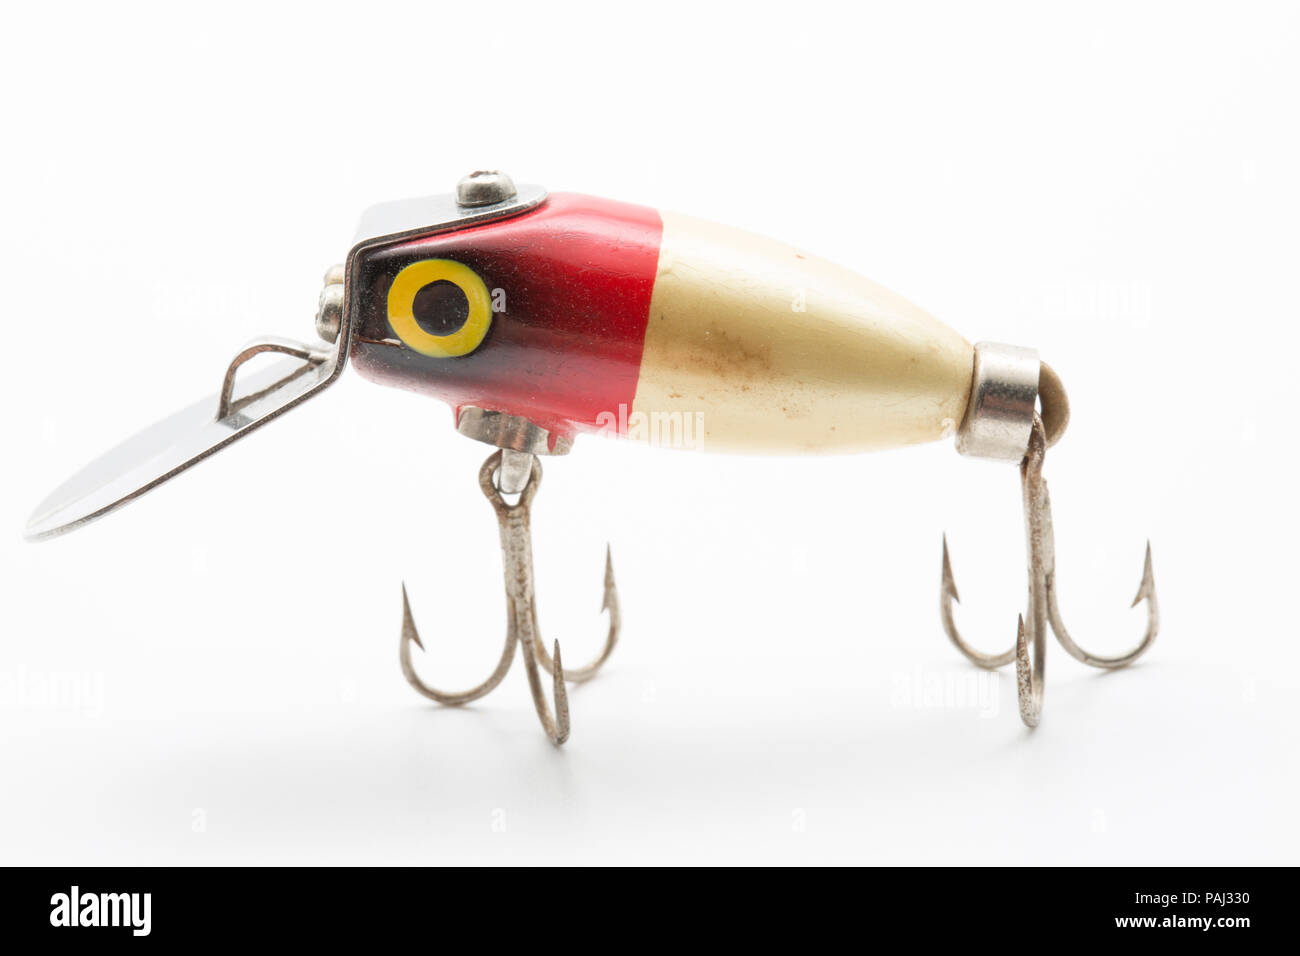 A single vintage fishing lure equipped with treble hooks, possibly by Woods  MFG, on a white background. These types of lures for catching predatory fi  Stock Photo - Alamy